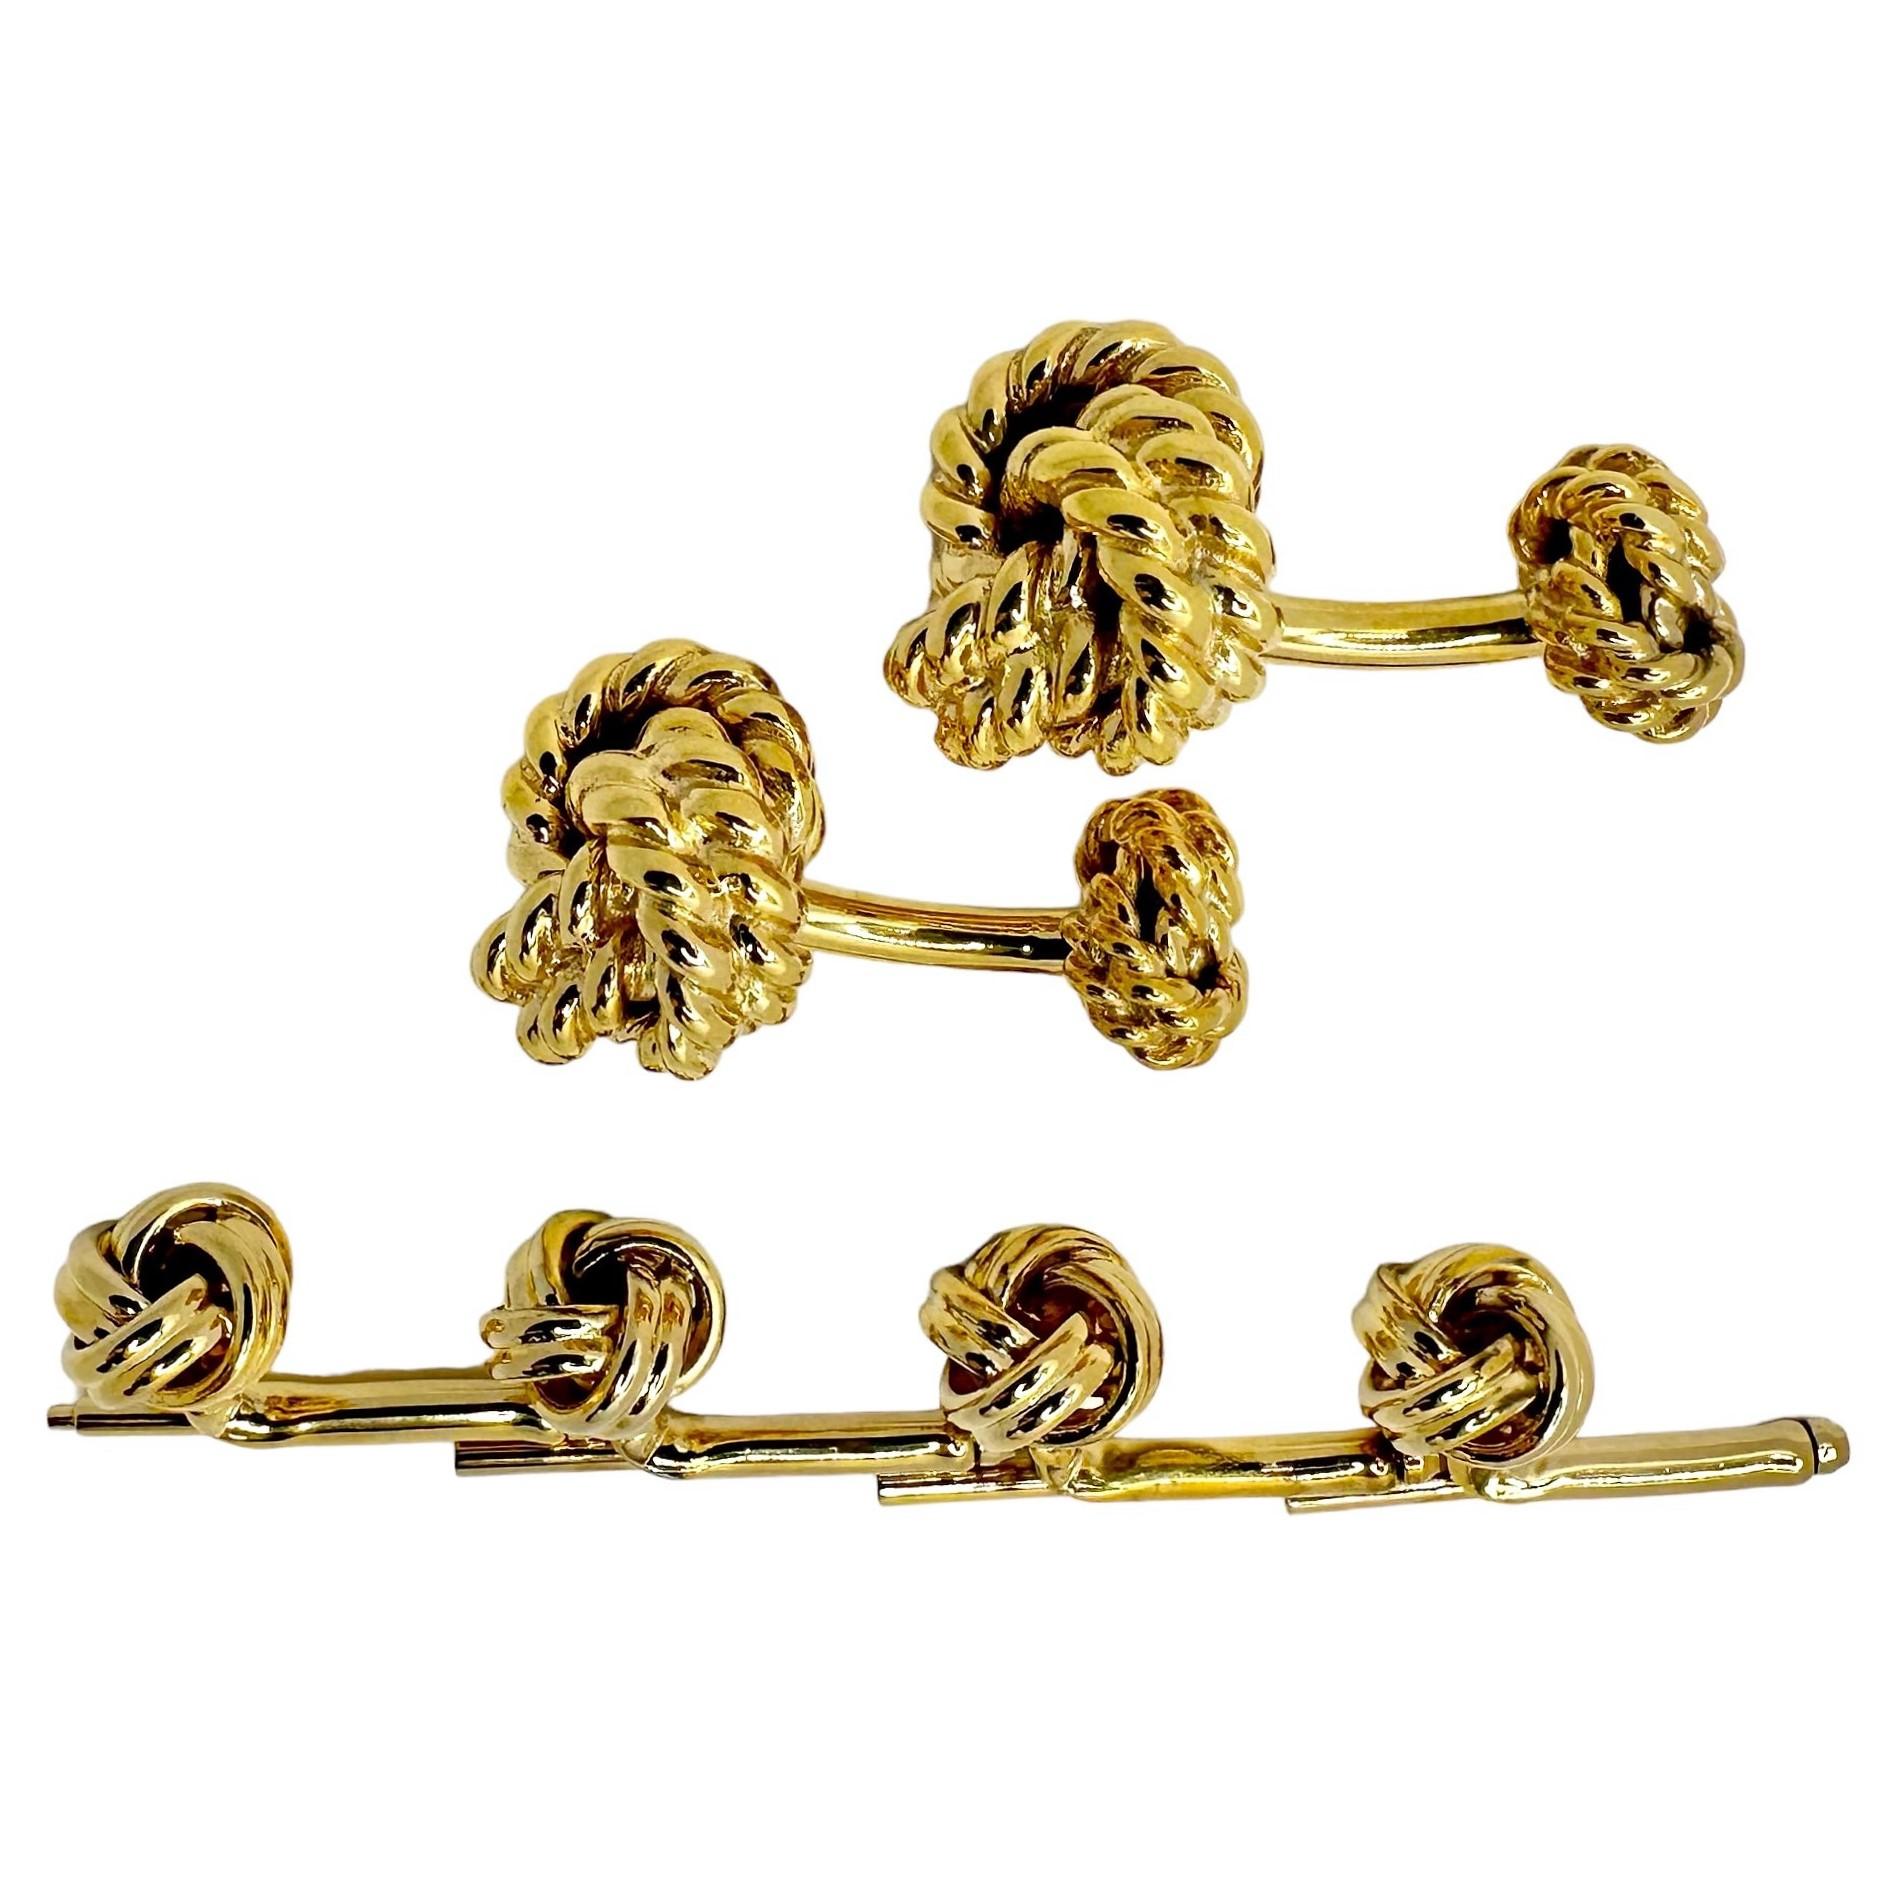 This pair of truly iconic 14k gold Tiffany knot motif cuff links with four matching 14k gold stud buttons by a different maker, creates a wonderful dress set. The The cuff links measure 11/16 inches in diameter and the stud buttons measure a